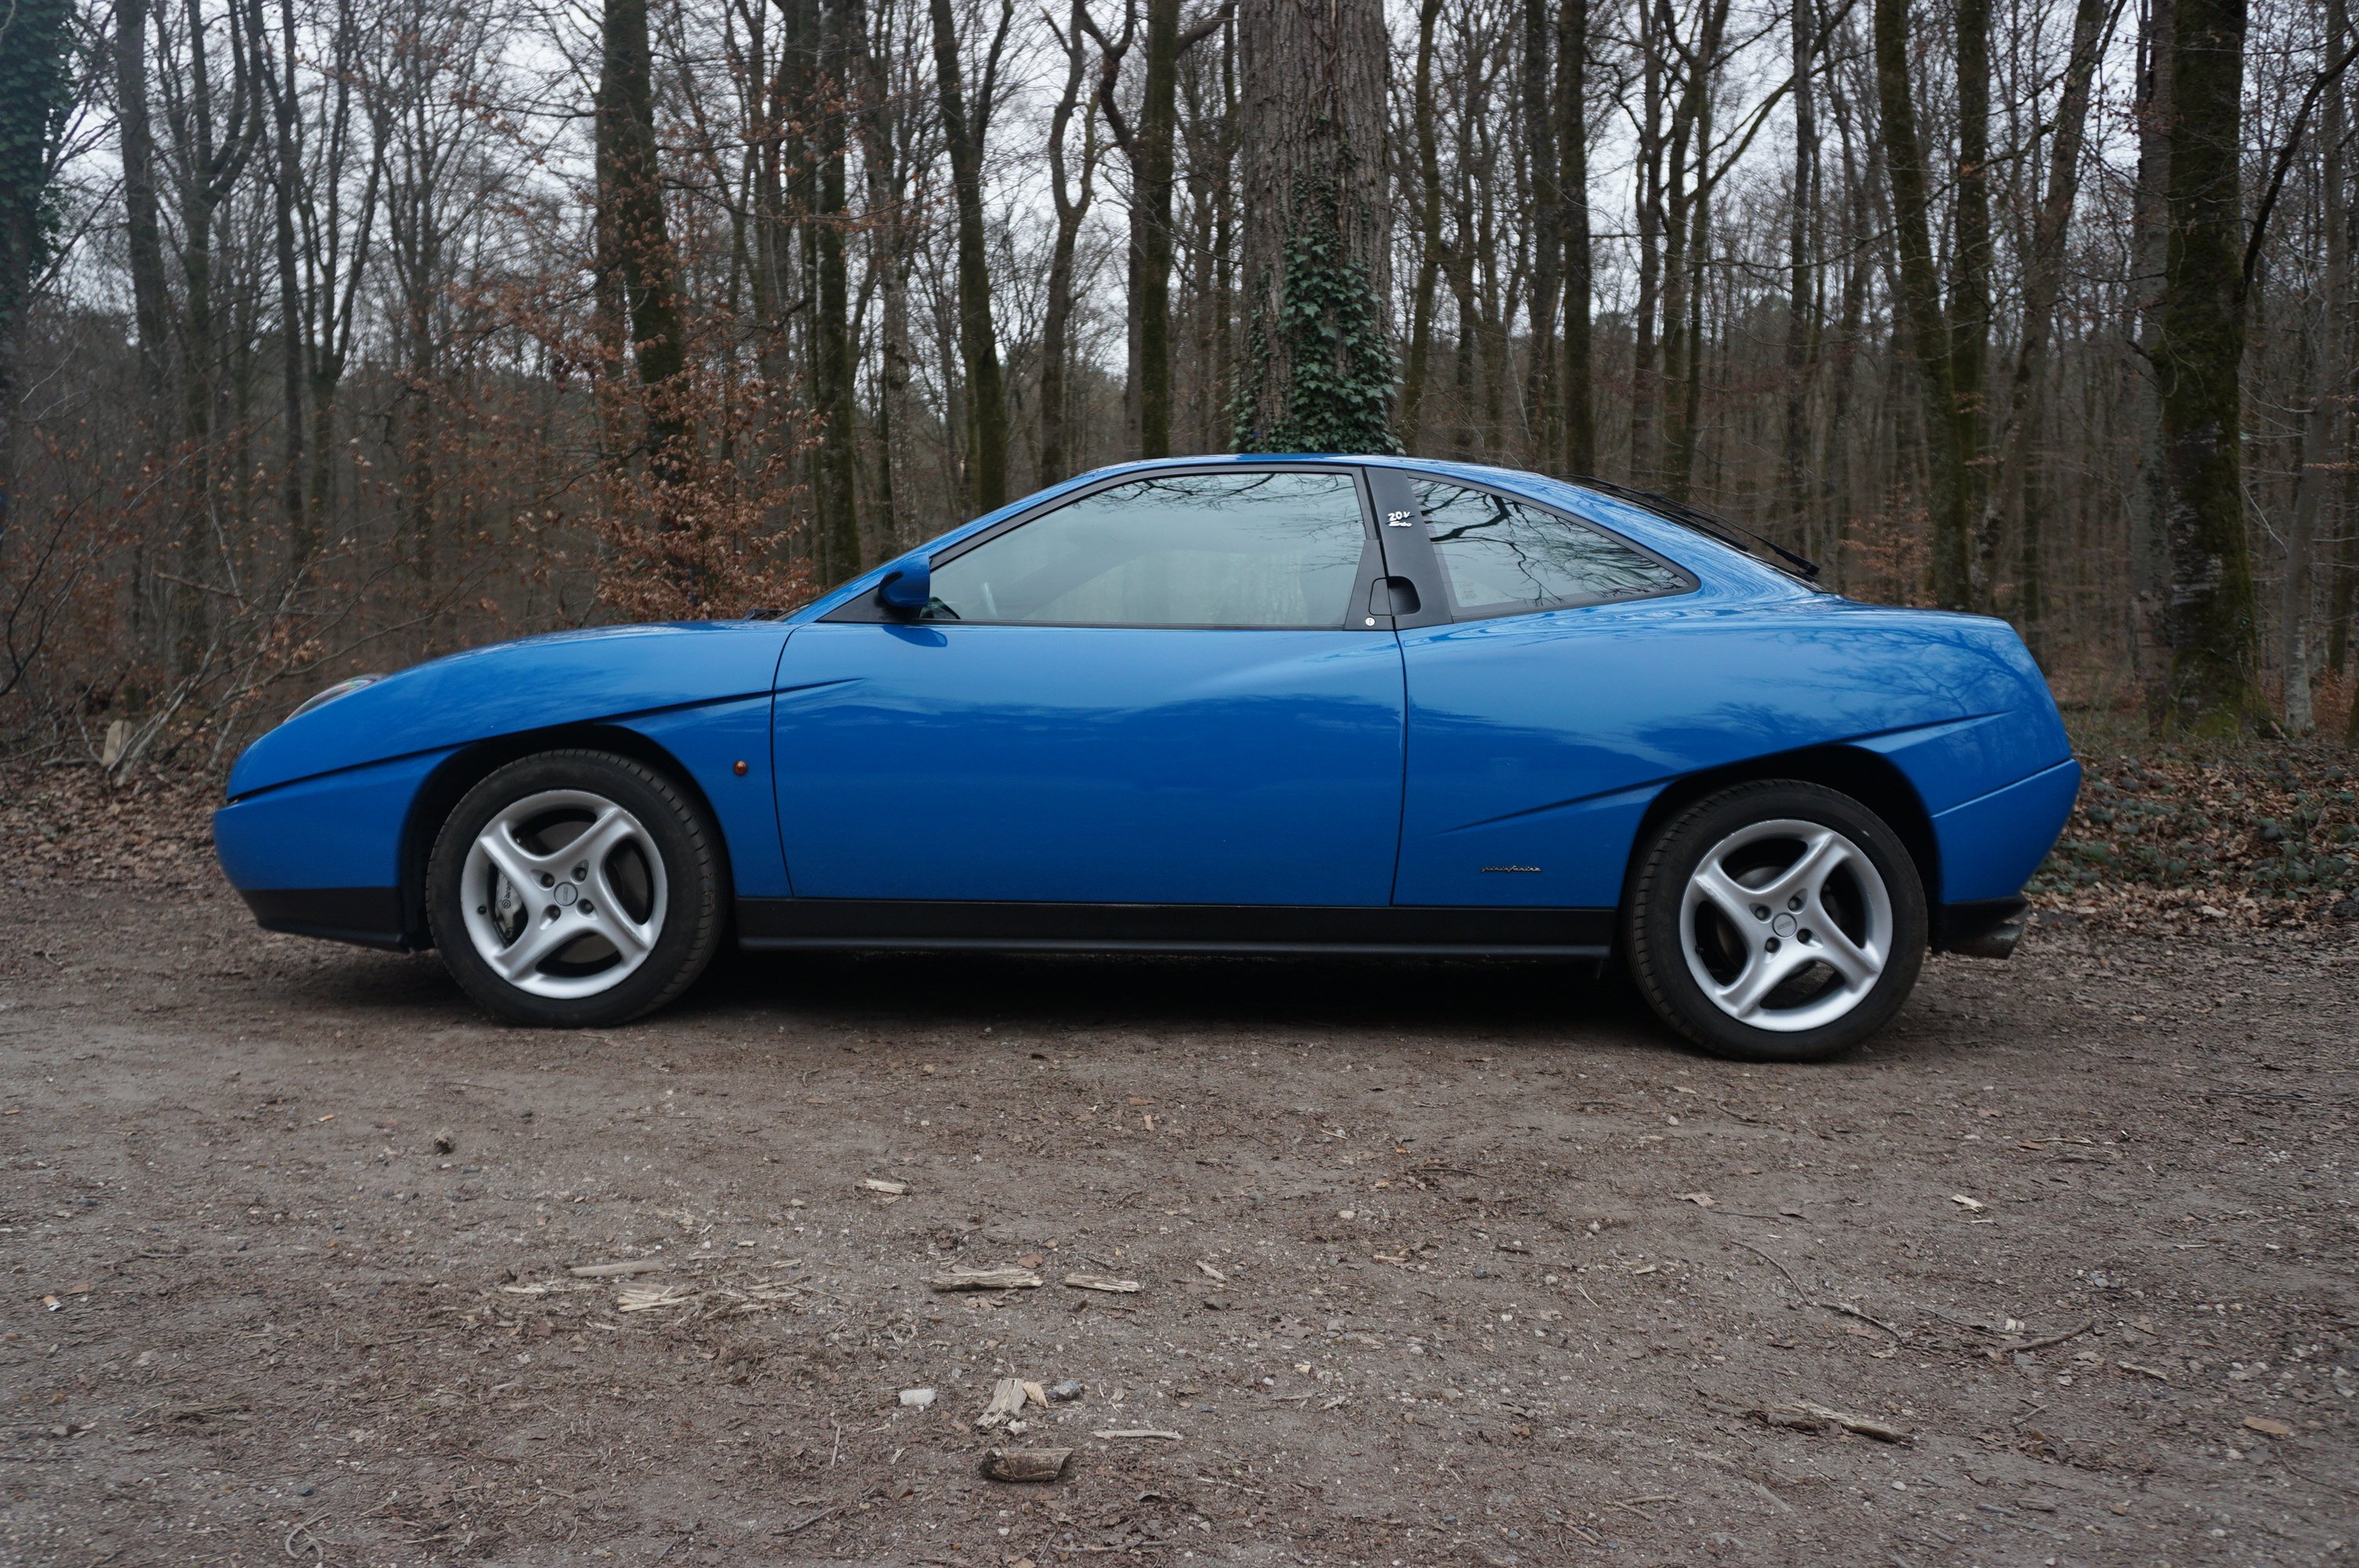 Top 101+ images fiat coupe pininfarina - In.thptnganamst.edu.vn